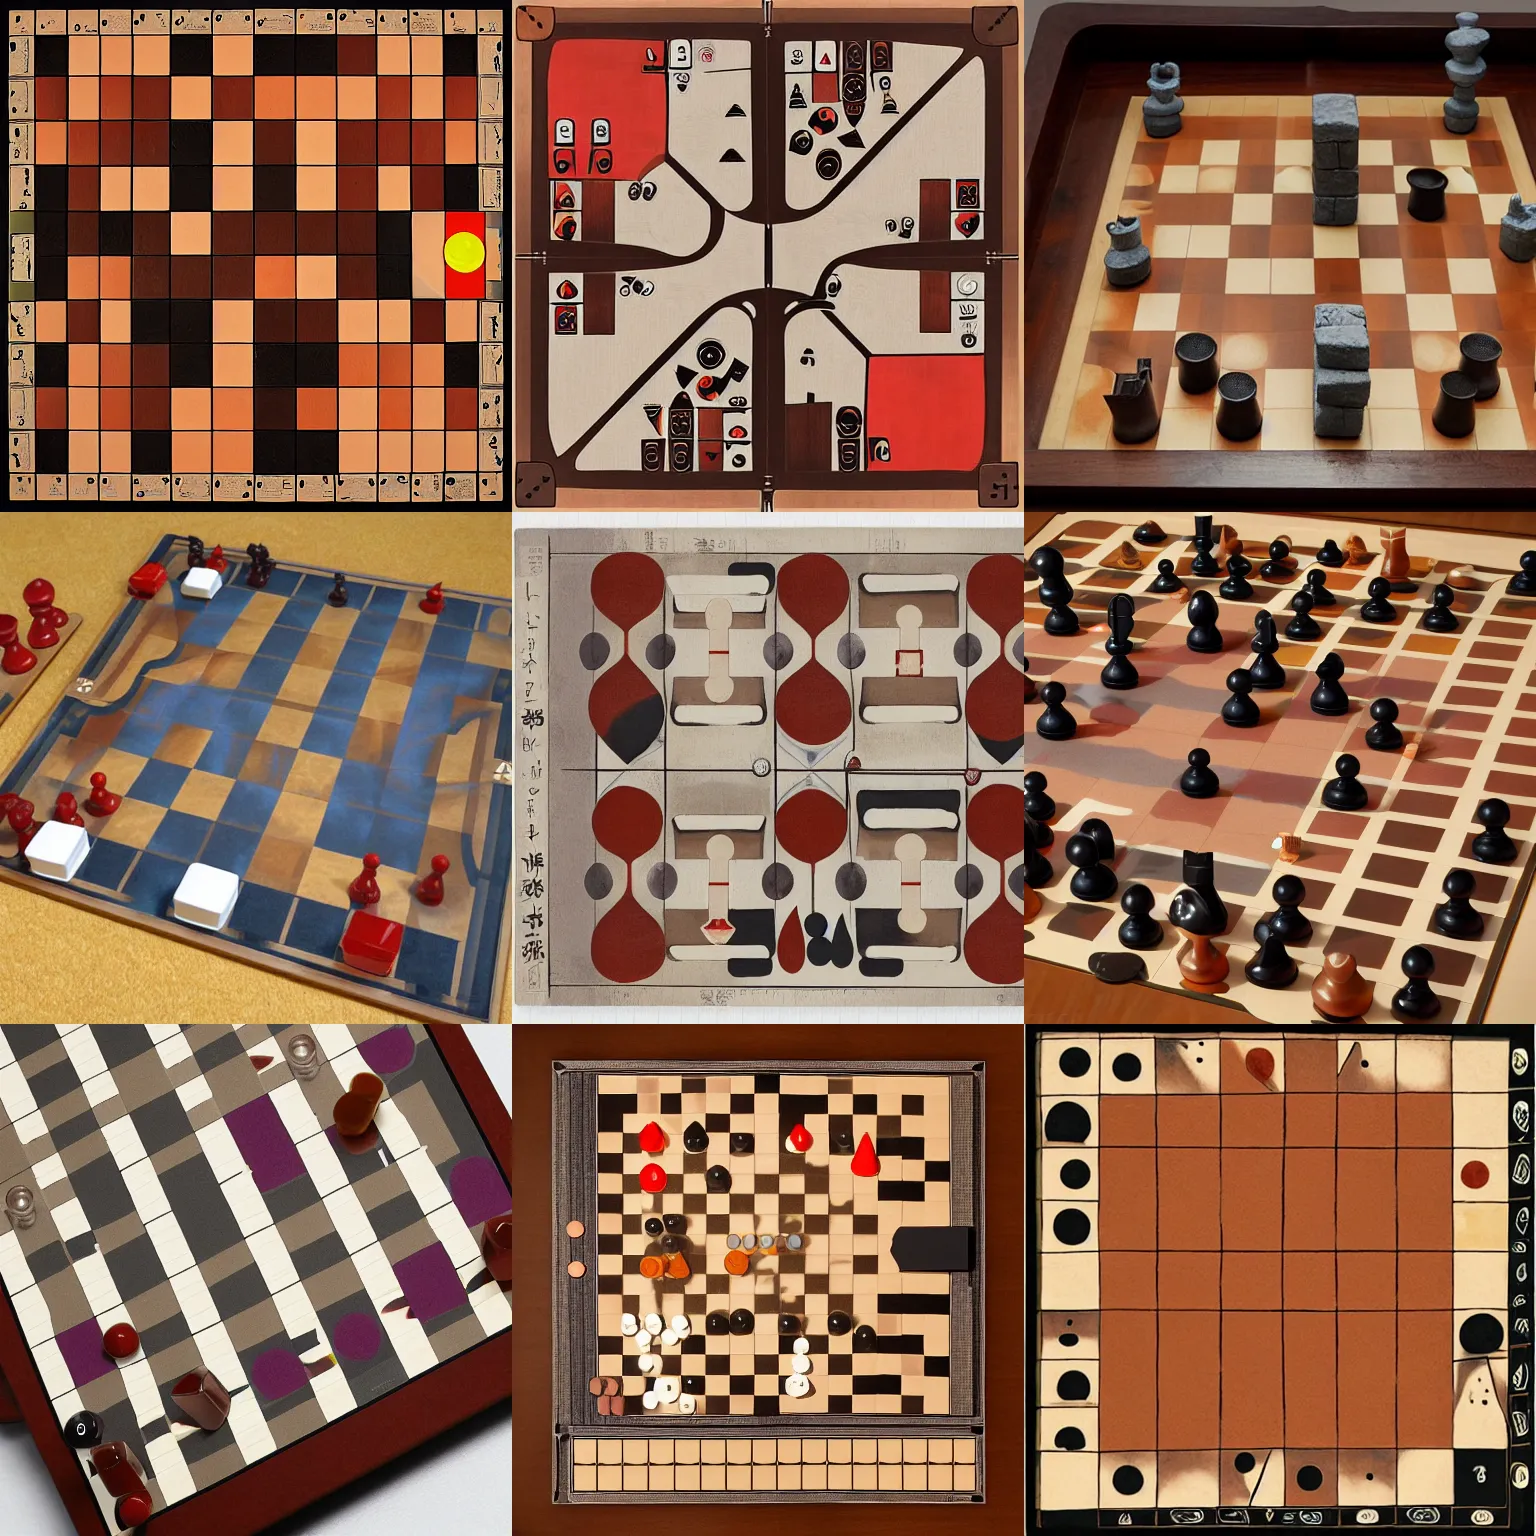 Prompt: abstract board game by shaun tan, gipf project, go baduk chess checkers backgammon